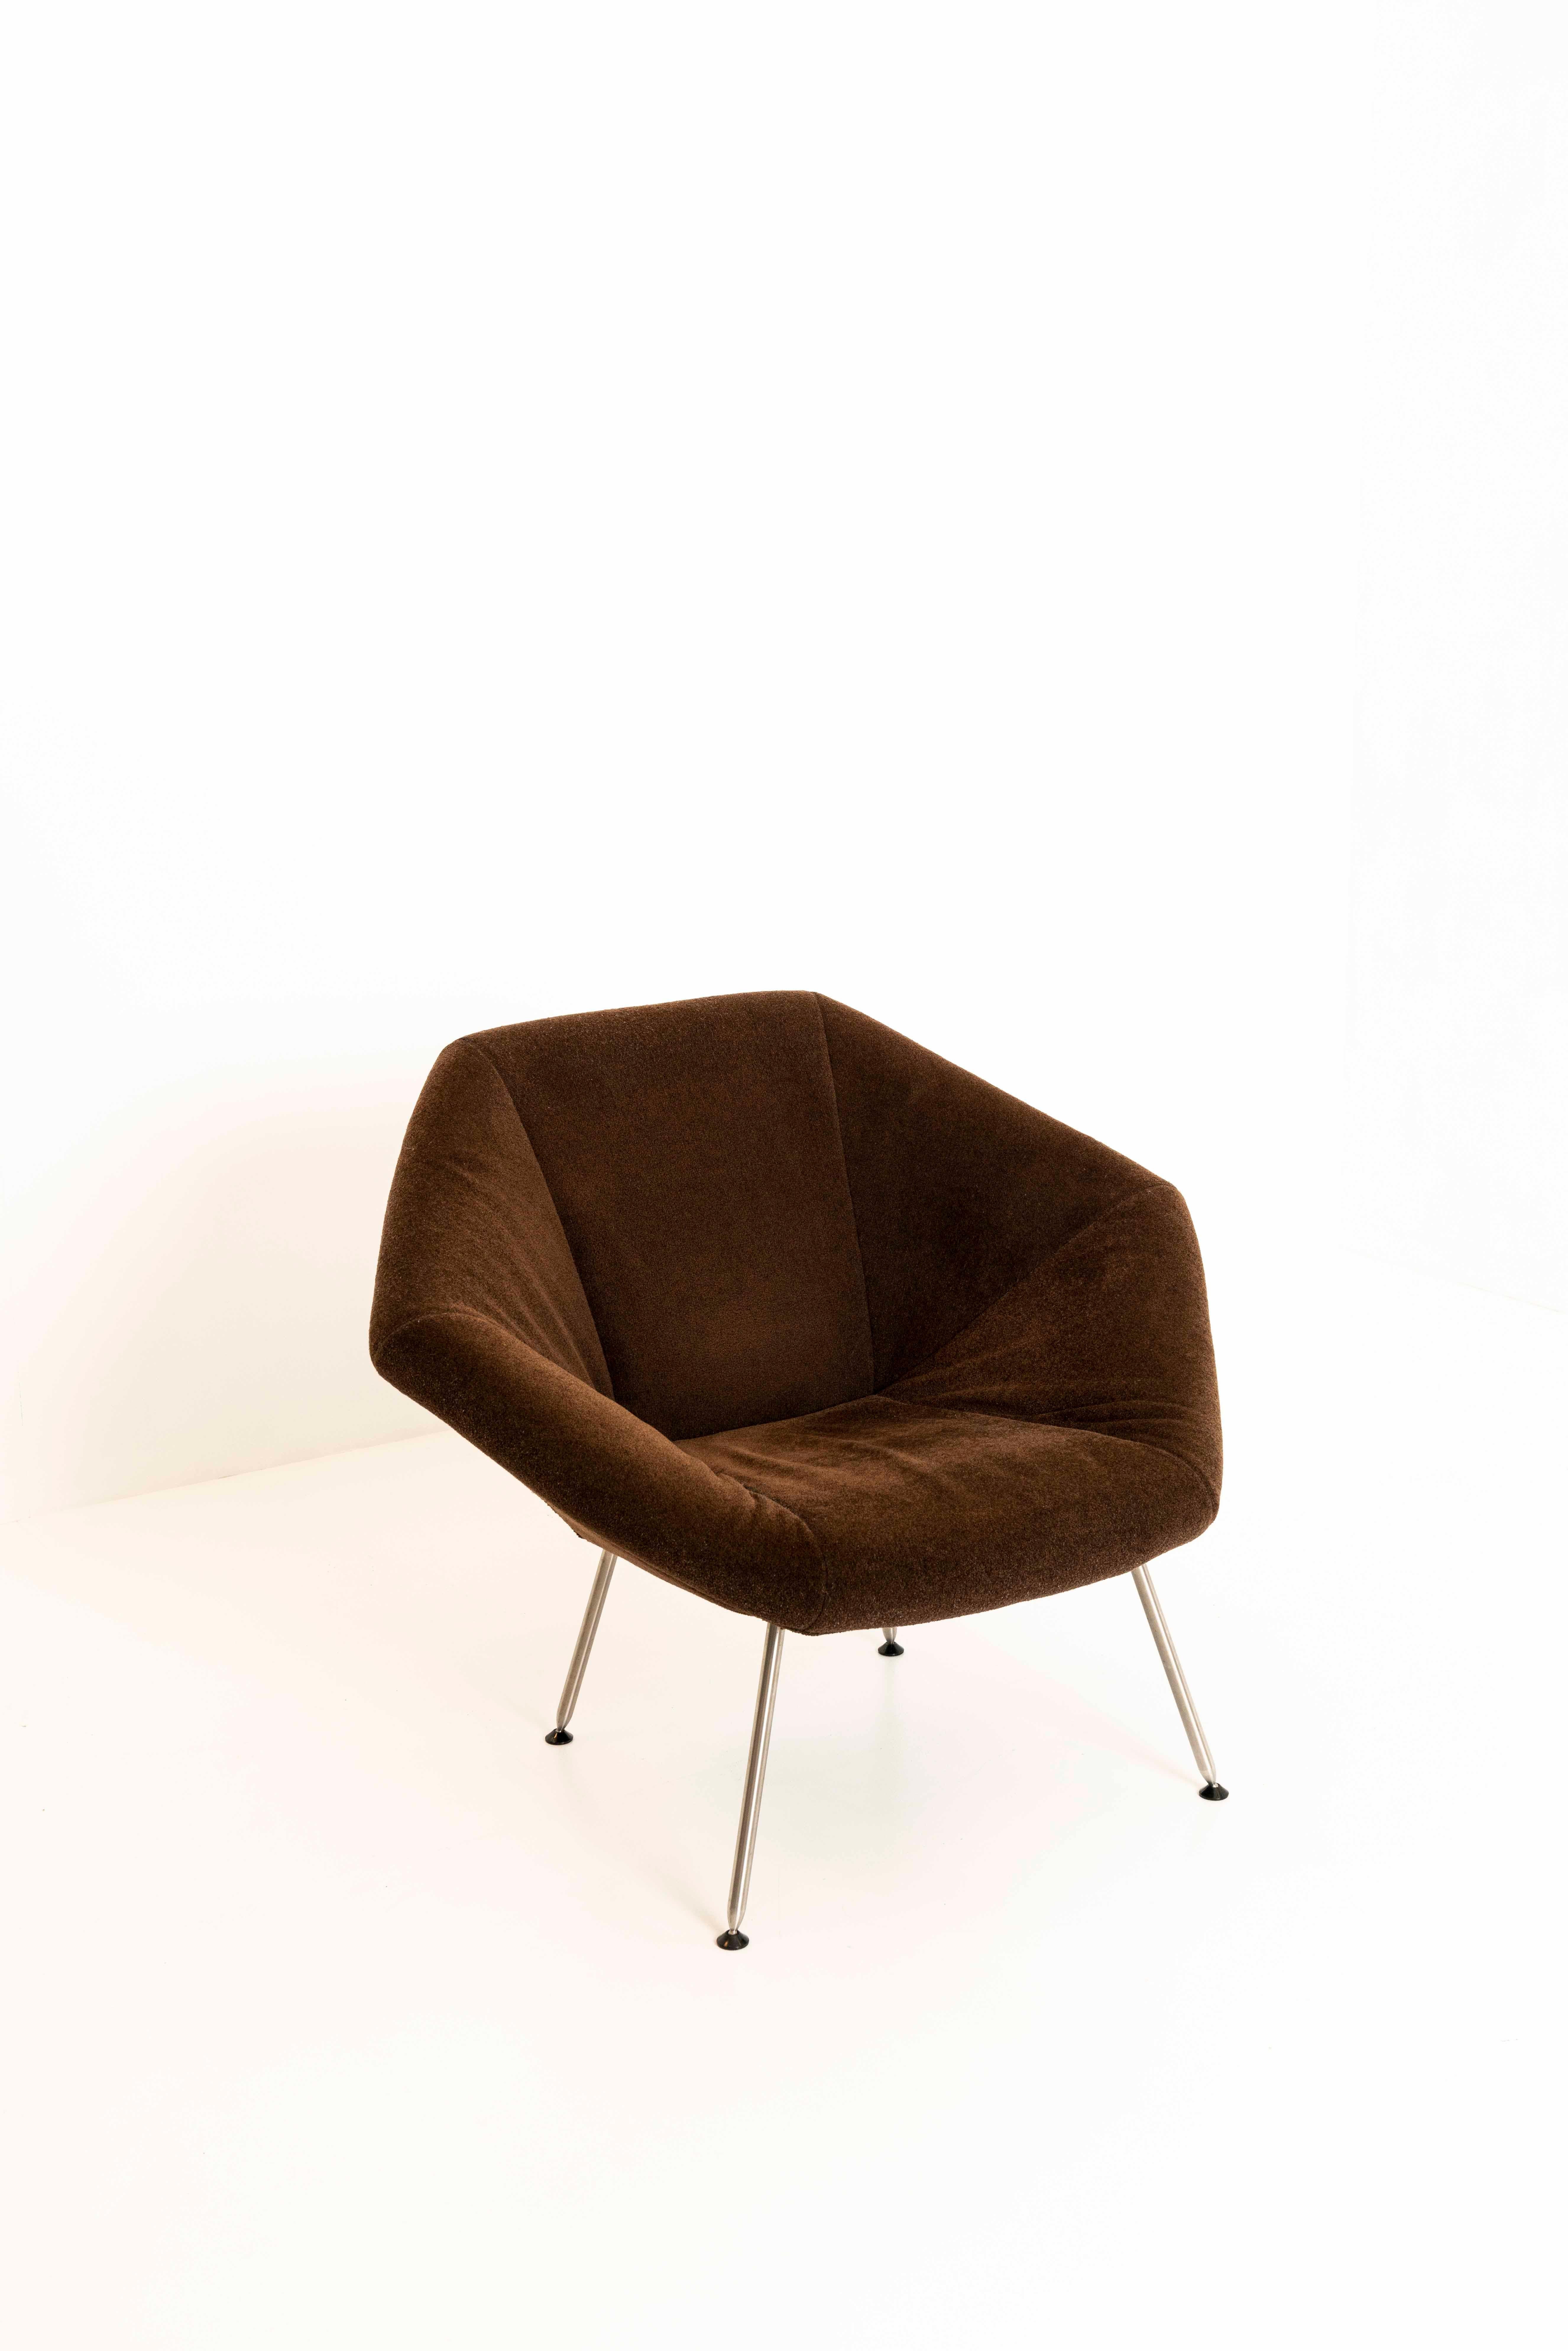 Post-Modern Lounge Chair by Frans Schrofer for 'Young' in Teddy Fabric, the Netherlands